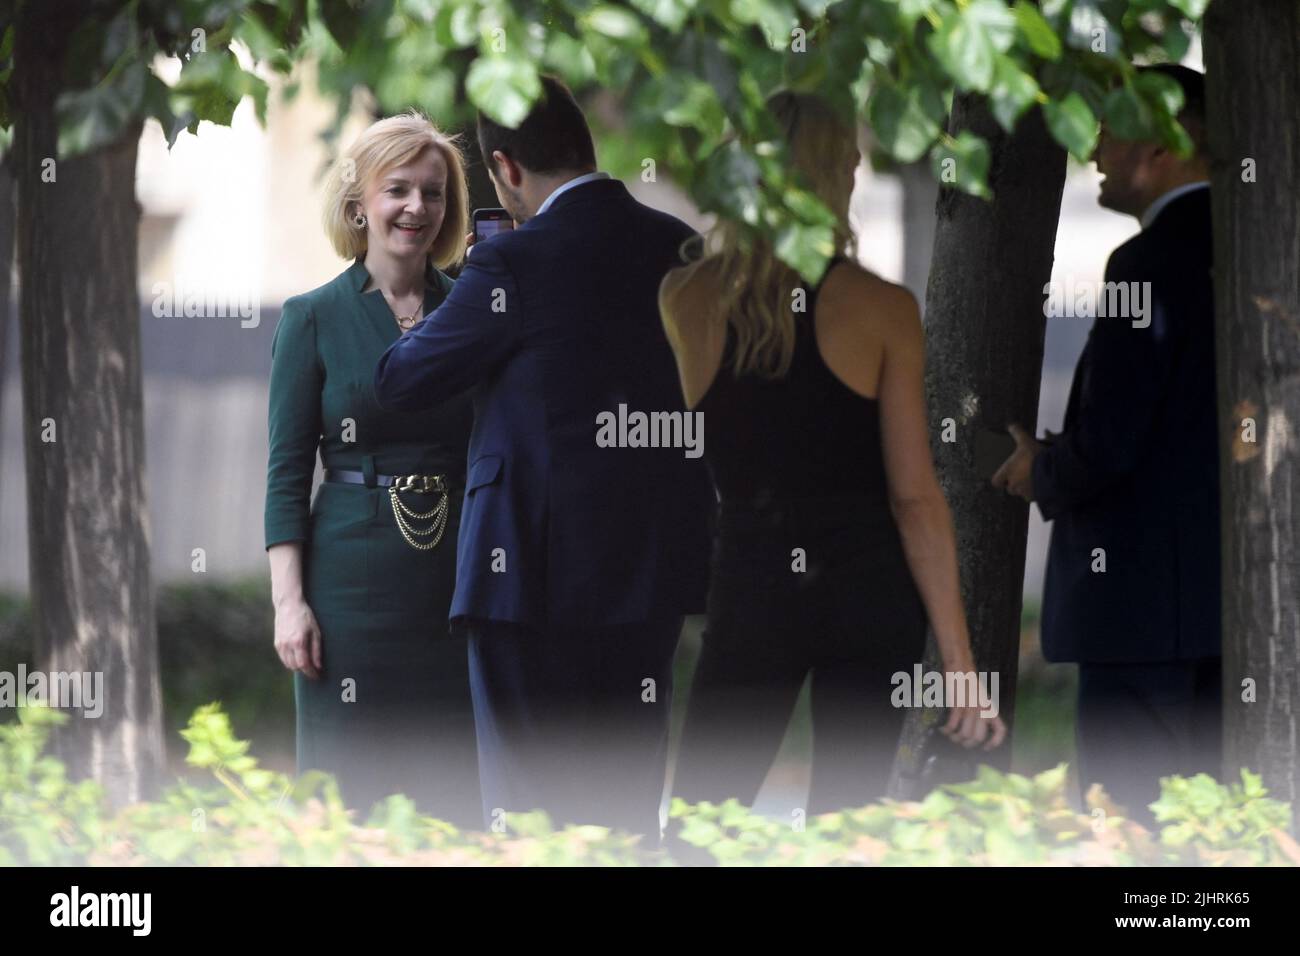 British Foreign Secretary and Conservative leadership candidate Liz Truss speaks with members of her team near the houses of Parliament, in London, Britain, July 20, 2022. REUTERS/Toby Melville Stock Photo